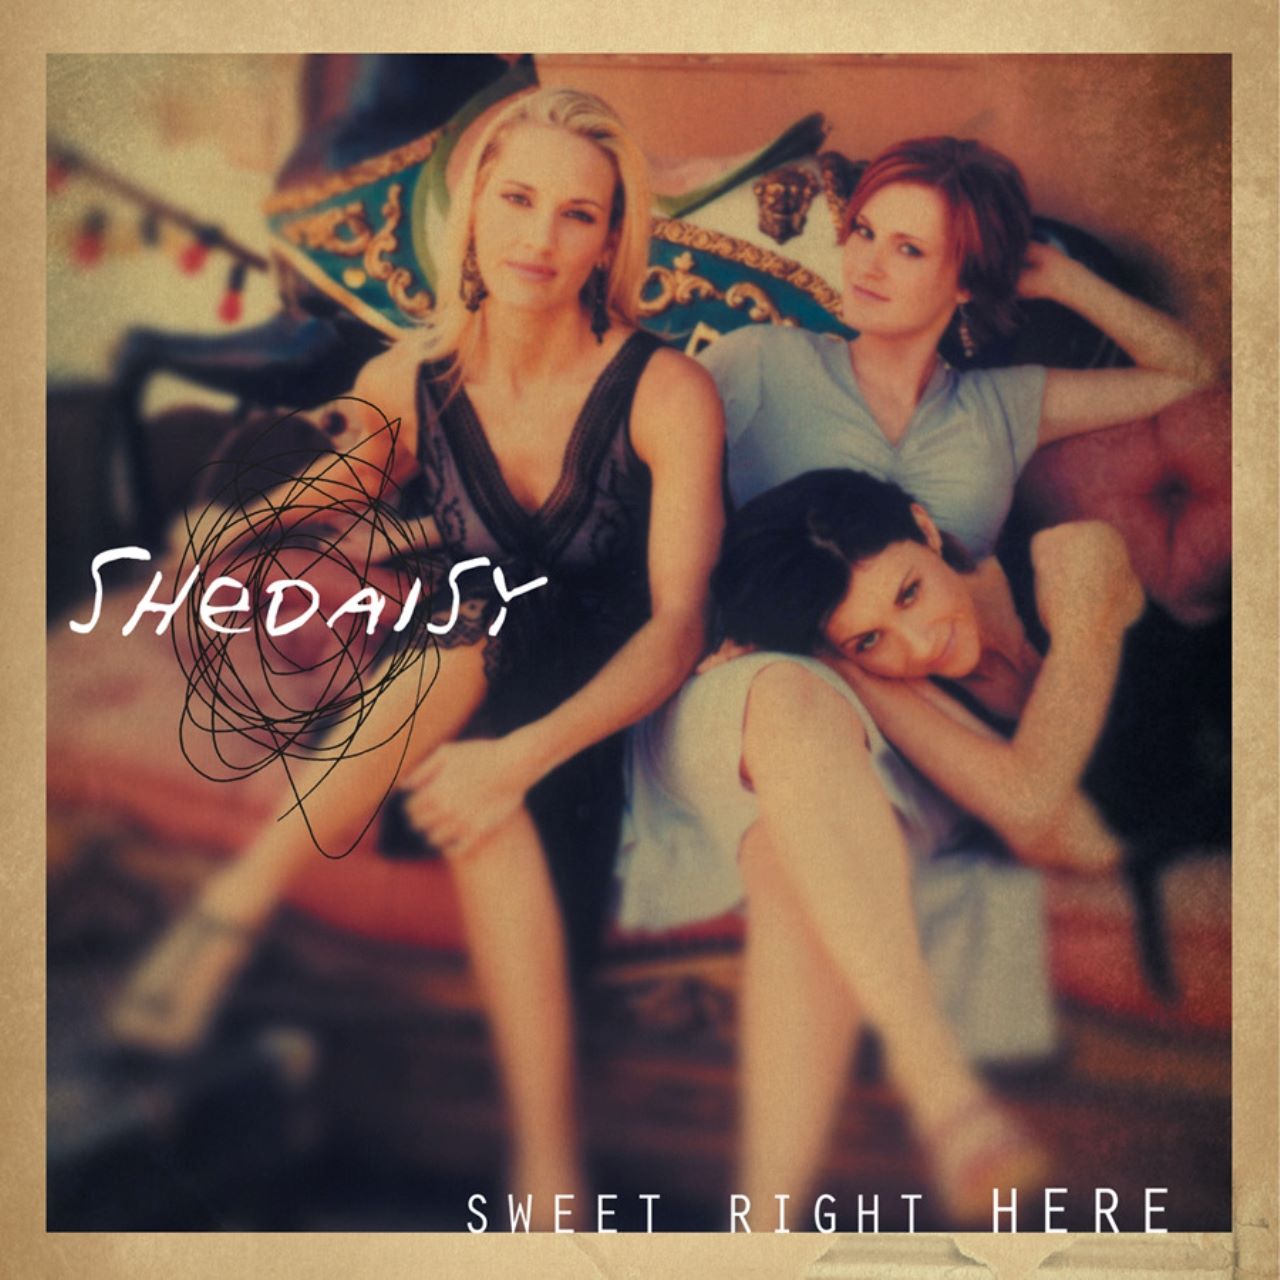 SheDaisy - Sweet Right Here cover album